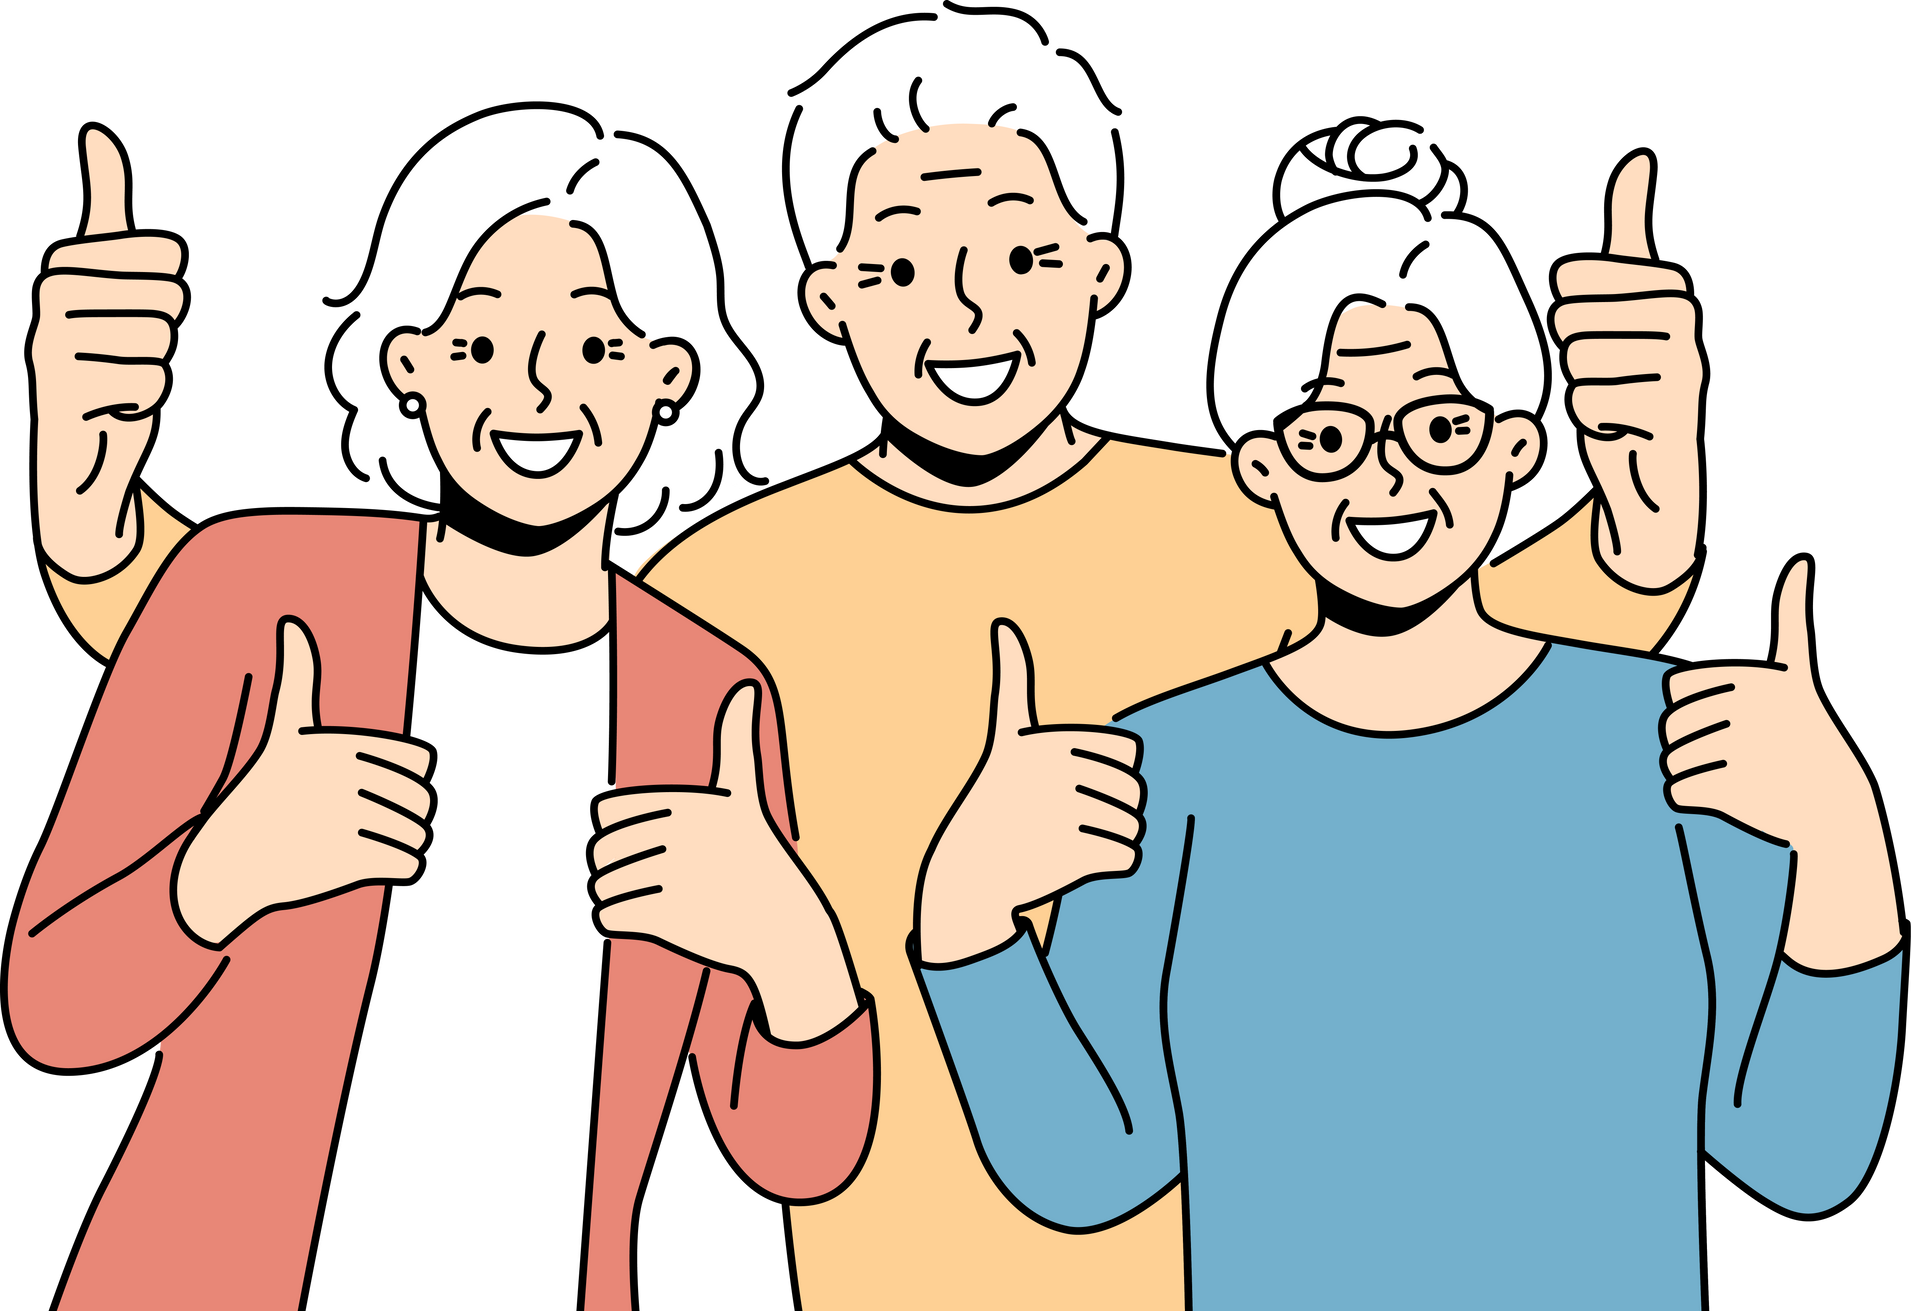 Smiling old people showing thumbs up